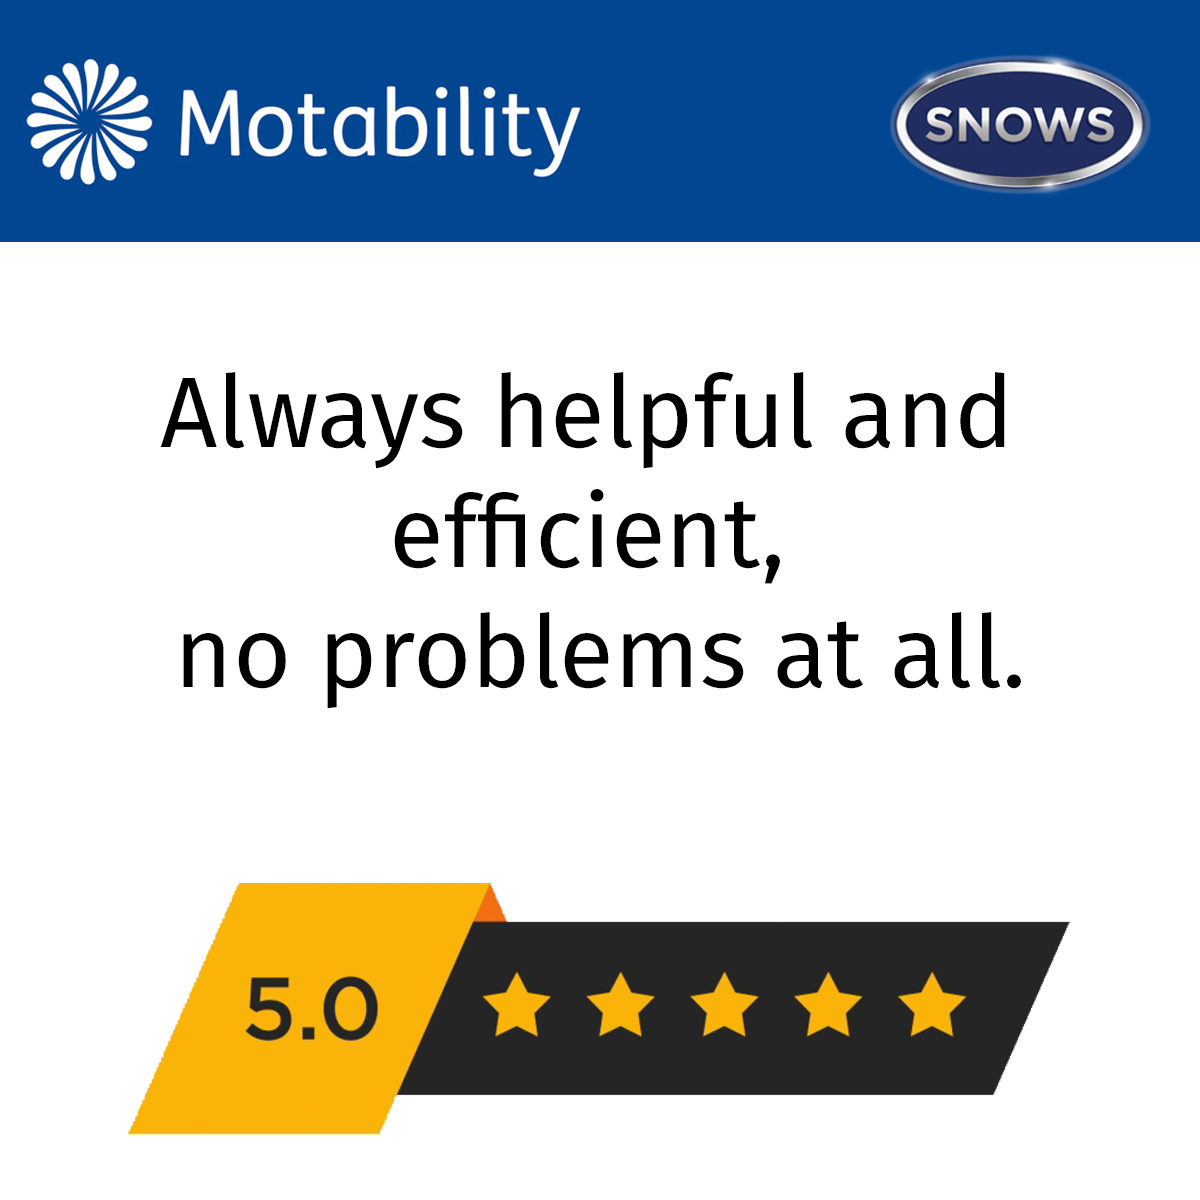 It is always great to hear from customers. We are very pleased to be able to provide high levels of service to our Motability customers. A great 5-star review from the team at Snows Peugeot Newbury. Well done team! #Motability #Motab #SnowsMotorGroup #MotabilityScheme